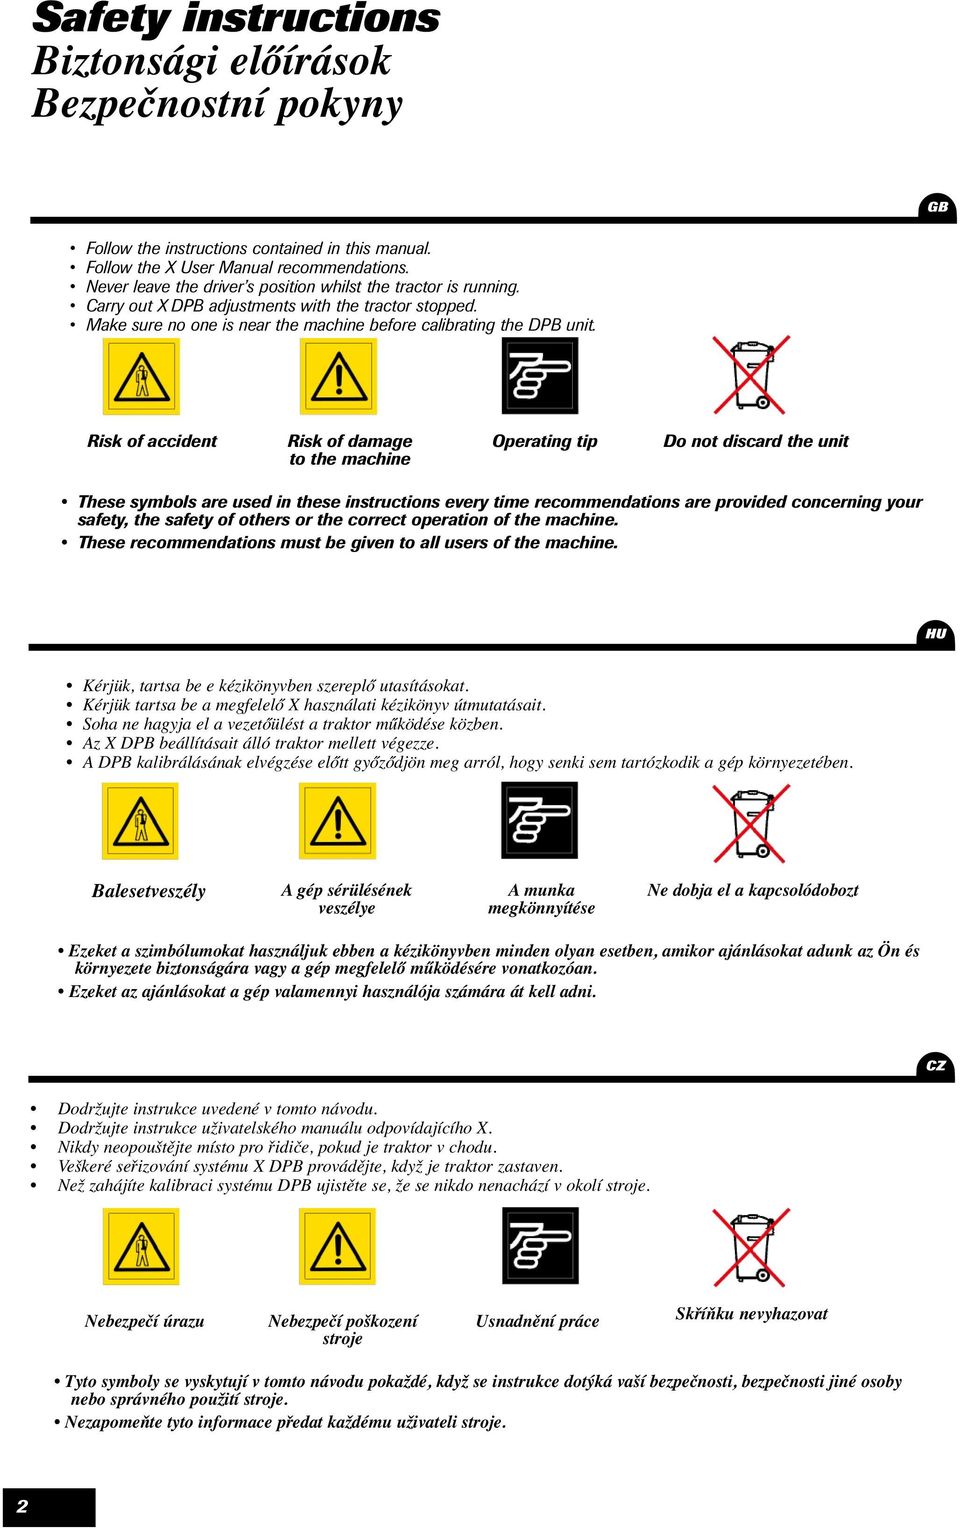 Risk of accident Risk of damage to the machine Operating tip Do not discard the unit These symbols are used in these instructions every time recommendations are provided concerning your safety, the